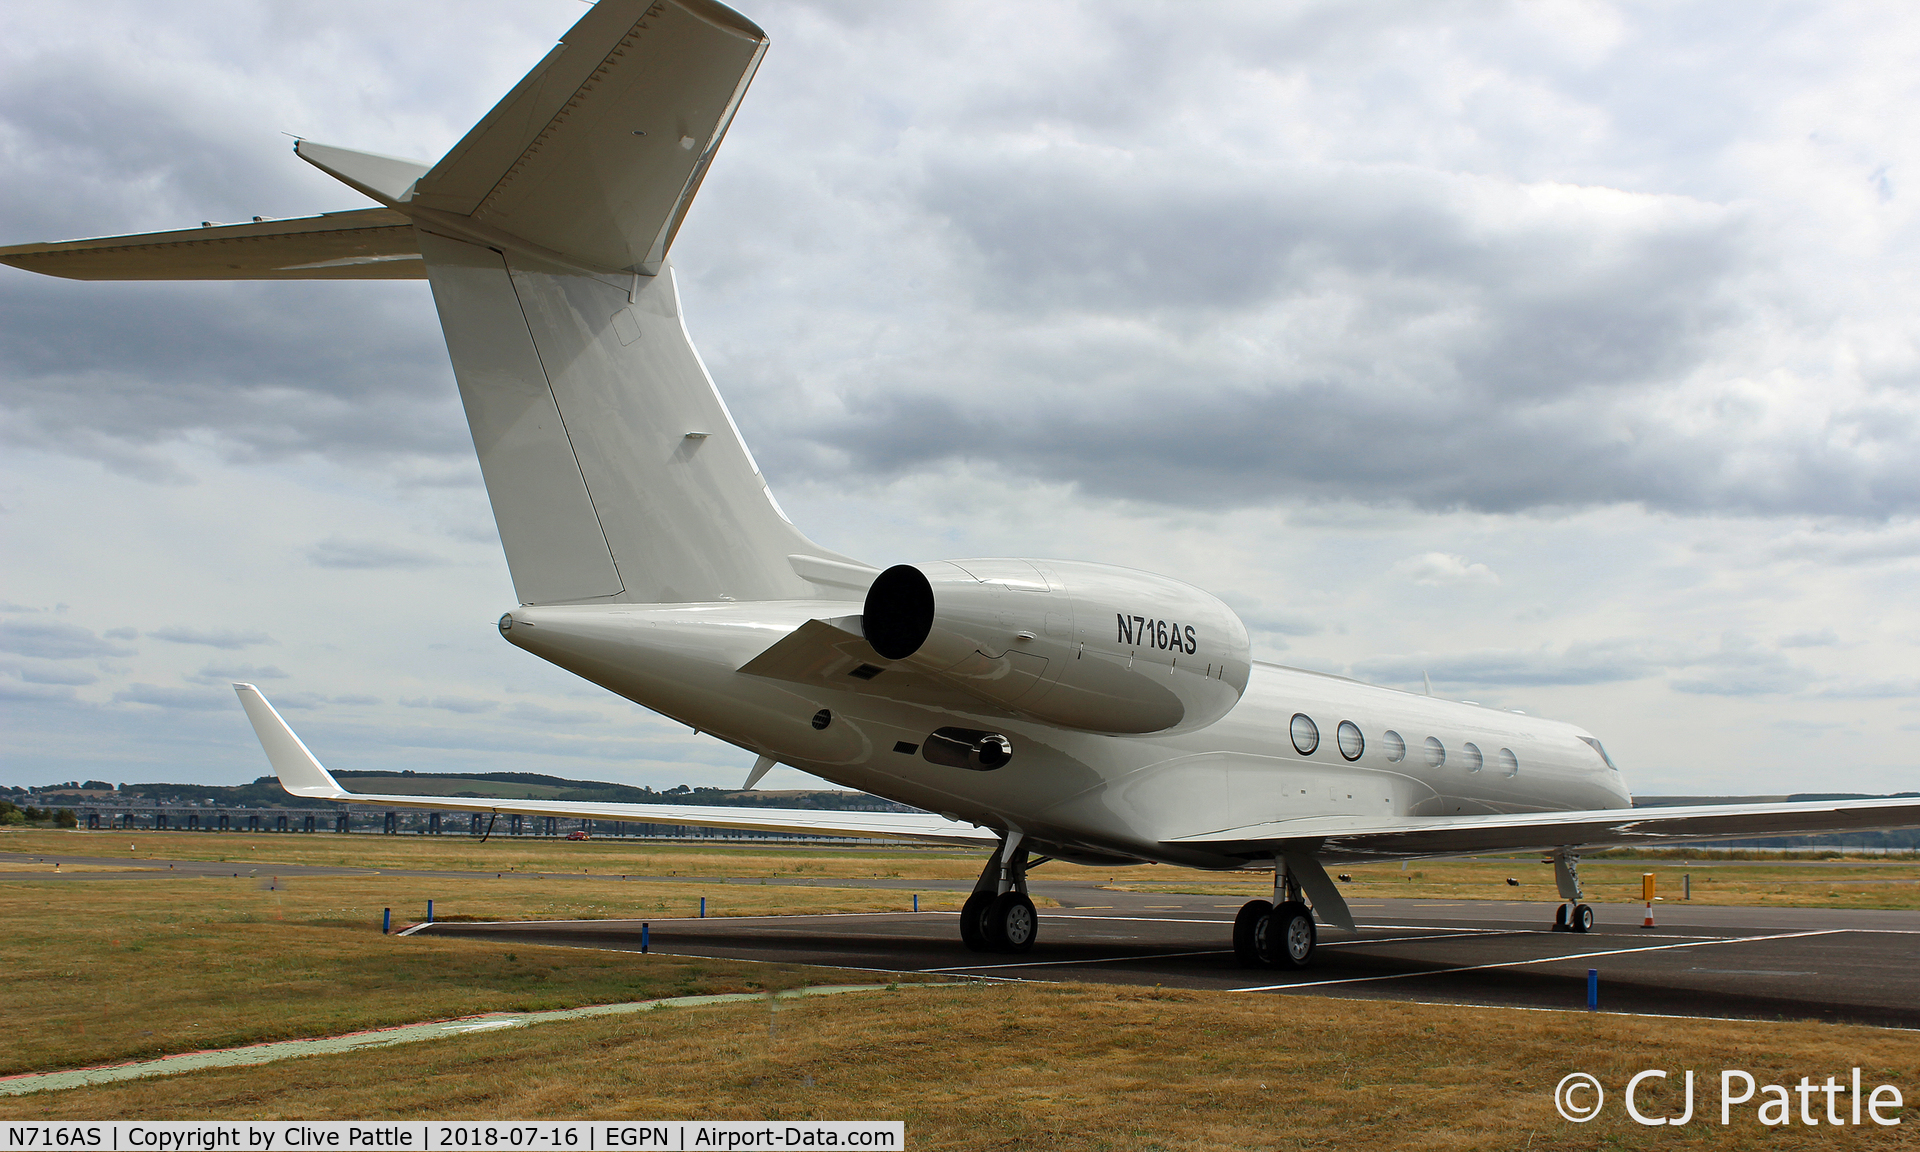 N716AS, 2002 Gulfstream Aerospace Gulfstream V C/N 687, At Dundee for the 2018 British Open Golf Championships at nearby Carnoustie.